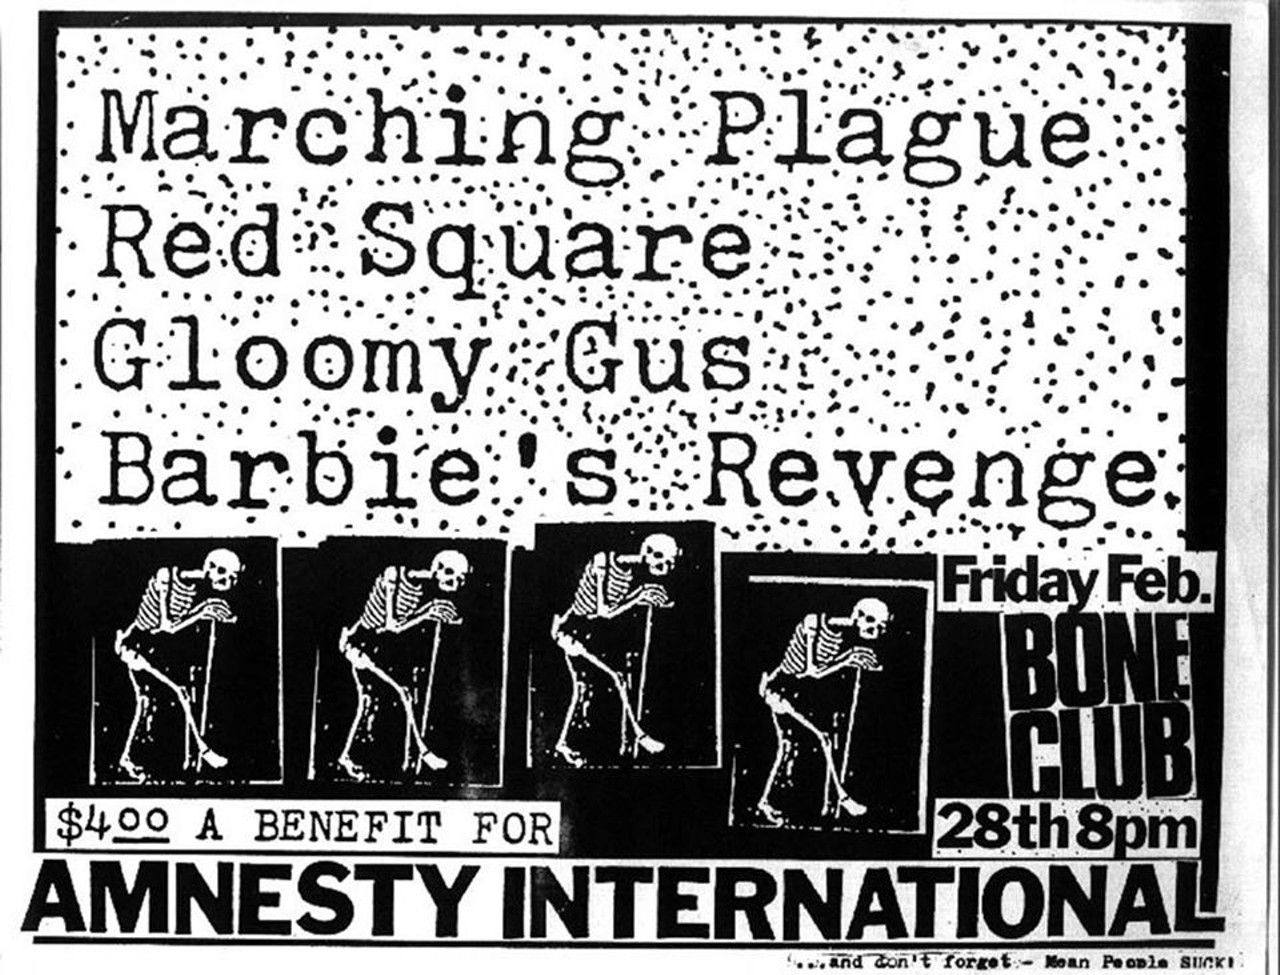 These Flyers from the '70s and '80s Tell the Story of San Antonio's Golden Age of Punk